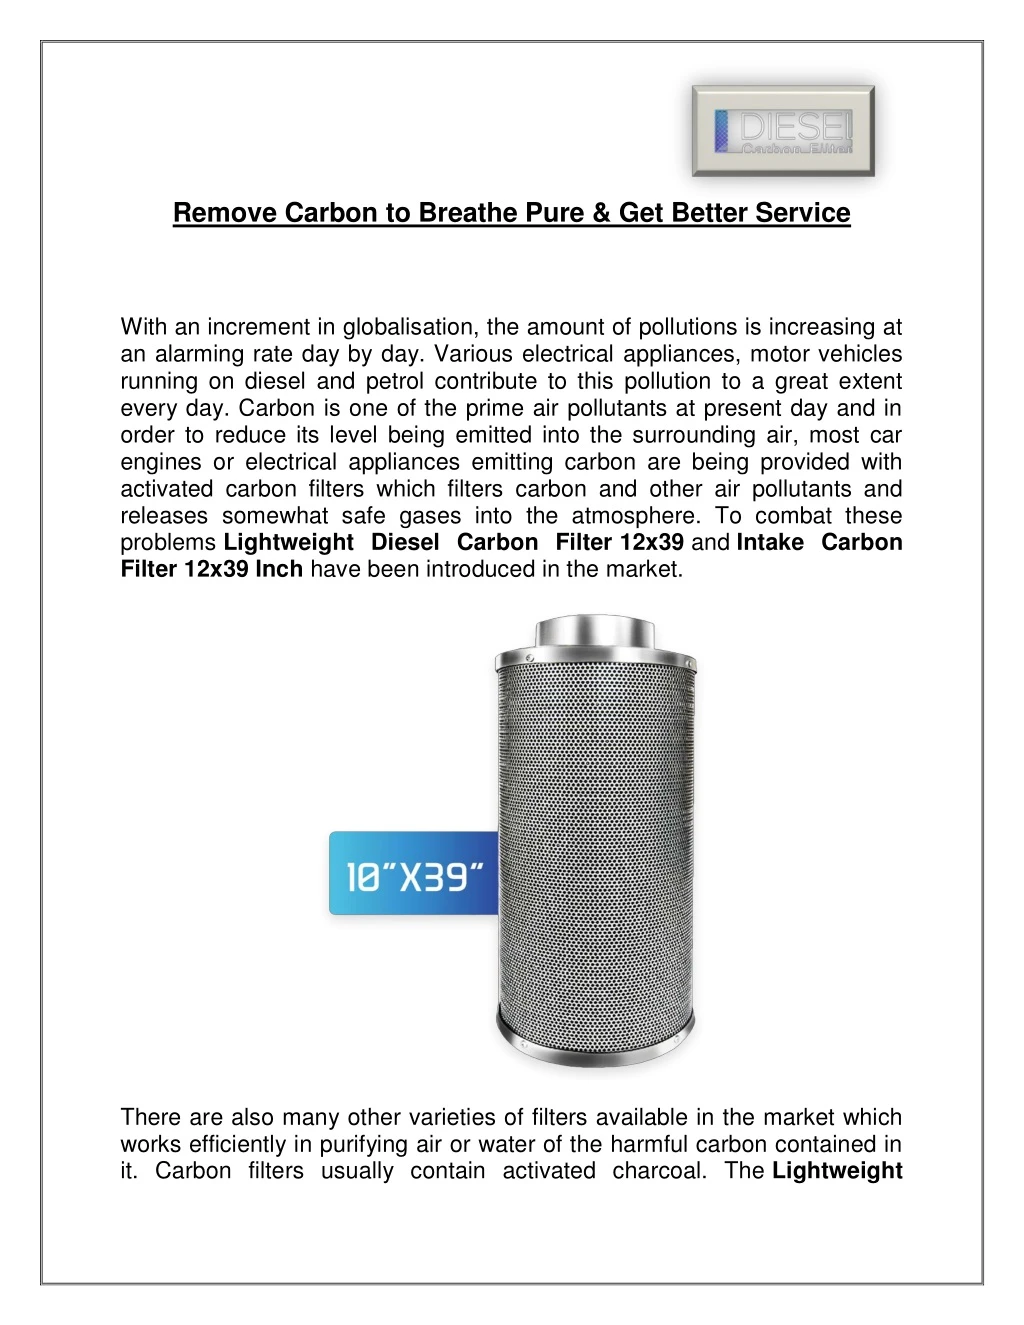 remove carbon to breathe pure get better service